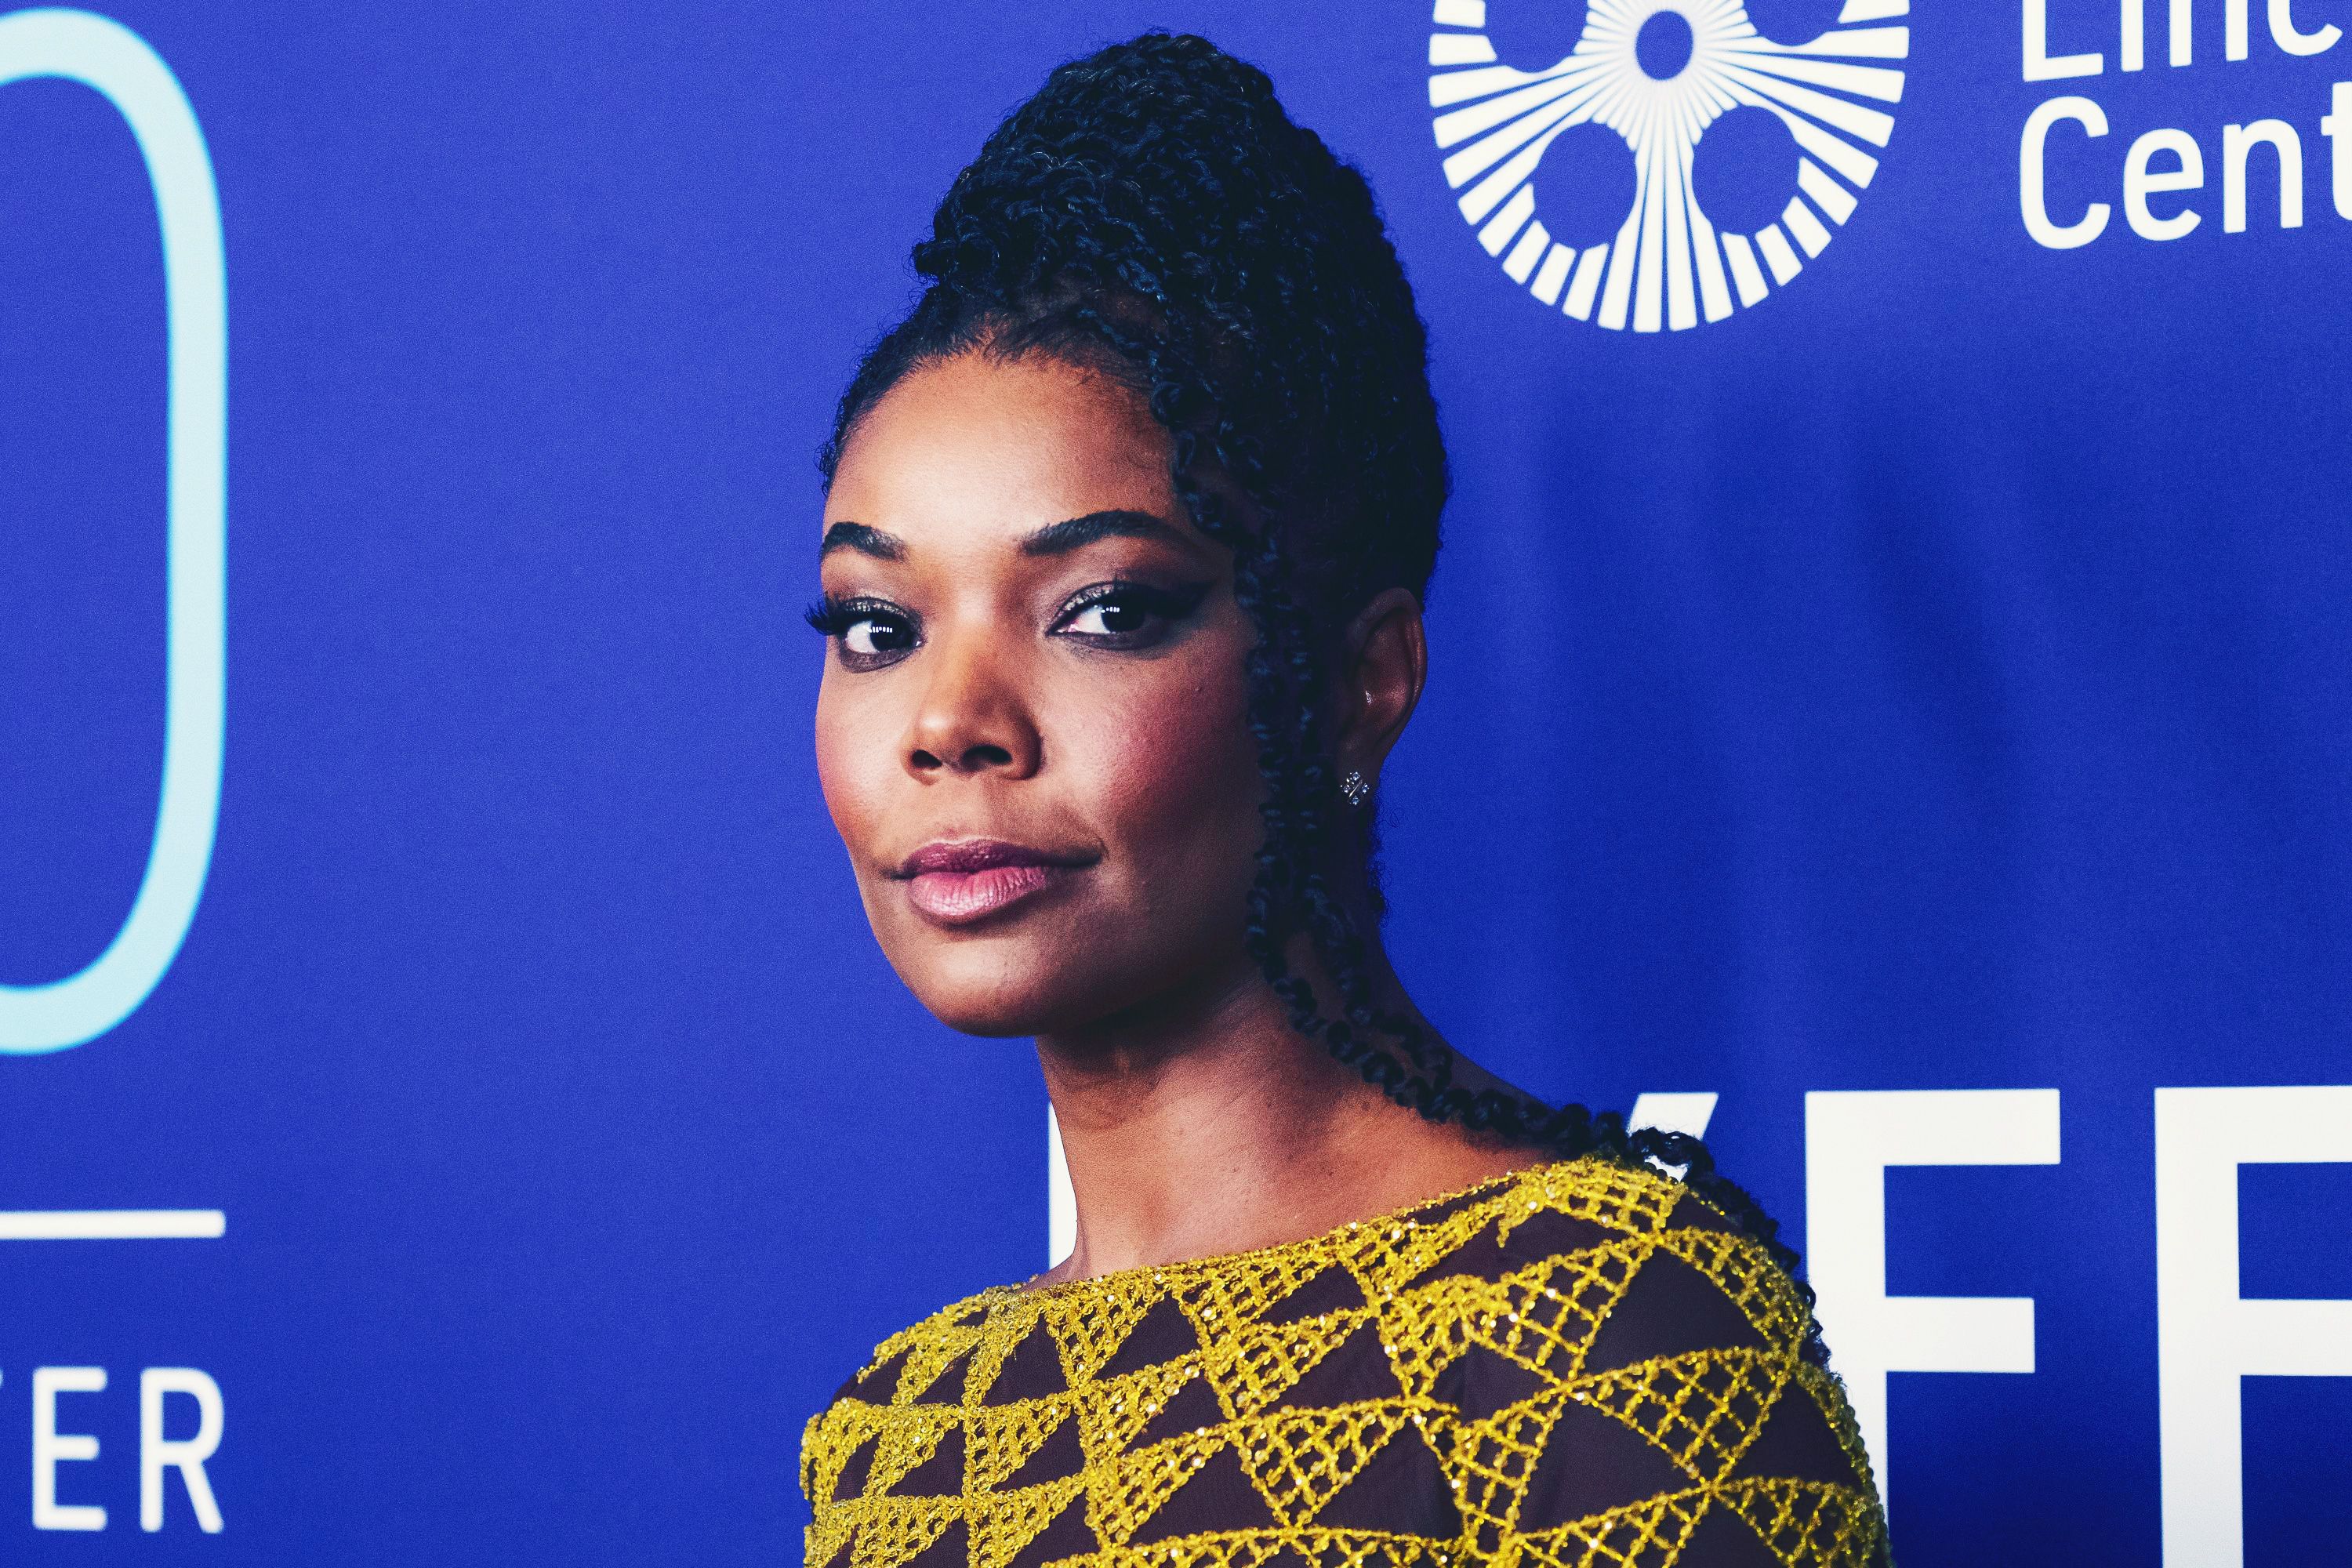 5 Things We Learned From Gabrielle Union's 'We're Going to Need More Wine